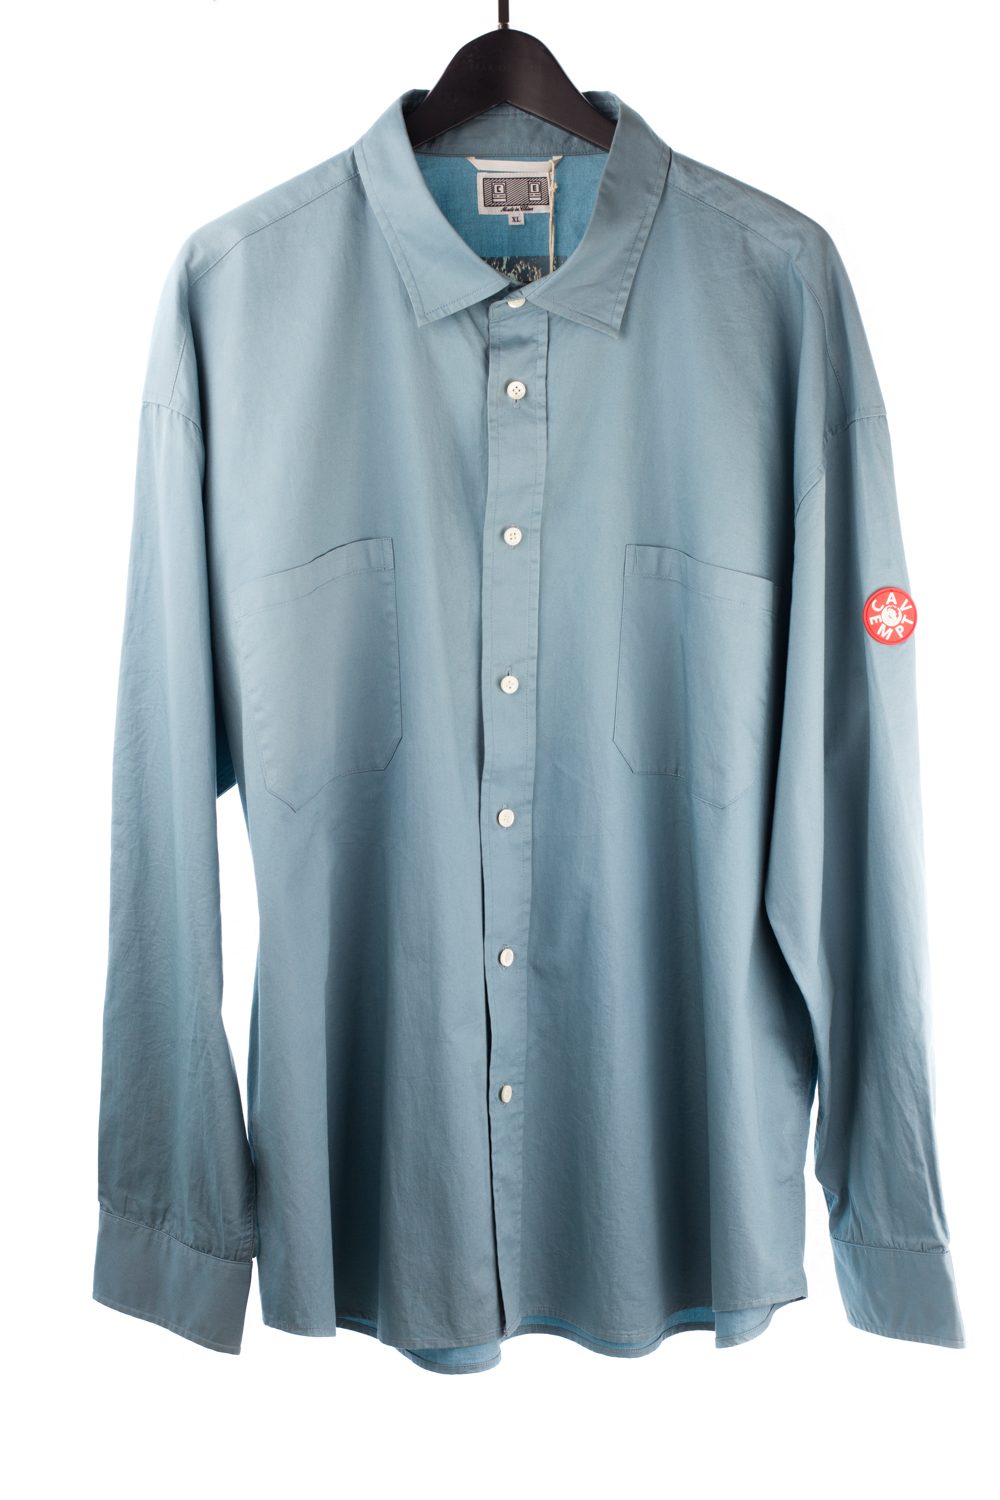 Double Pocket Cyan Button Up